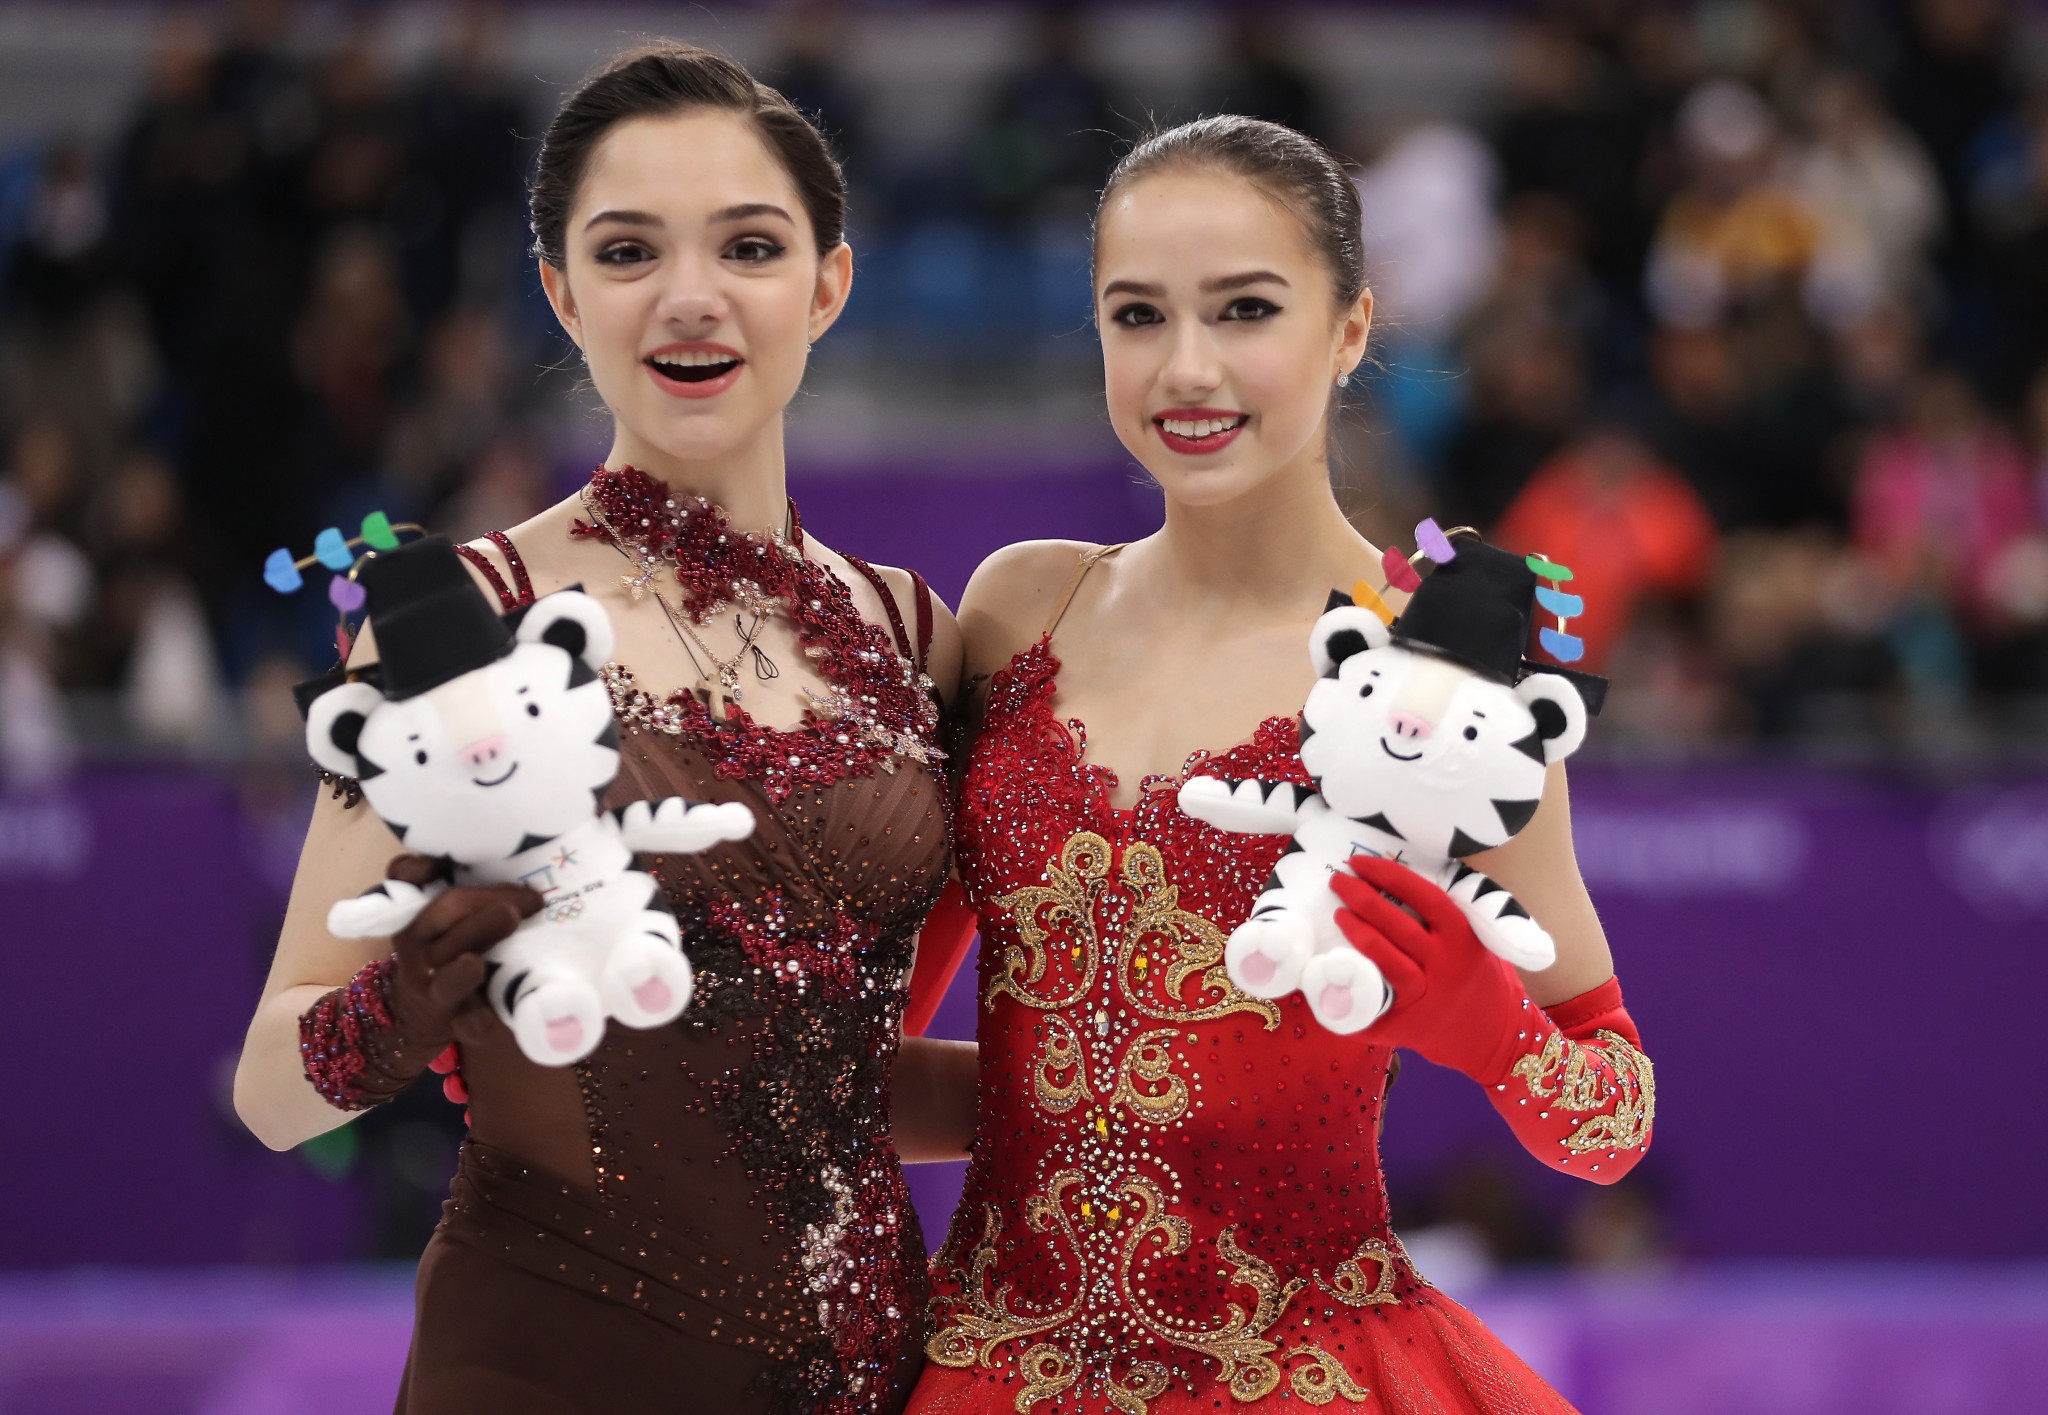 Evgenia Medvedeva, left, and Alina Zagitova, right, won silver and gold, respectively, at Pyeongchang 2018 ©Getty Images